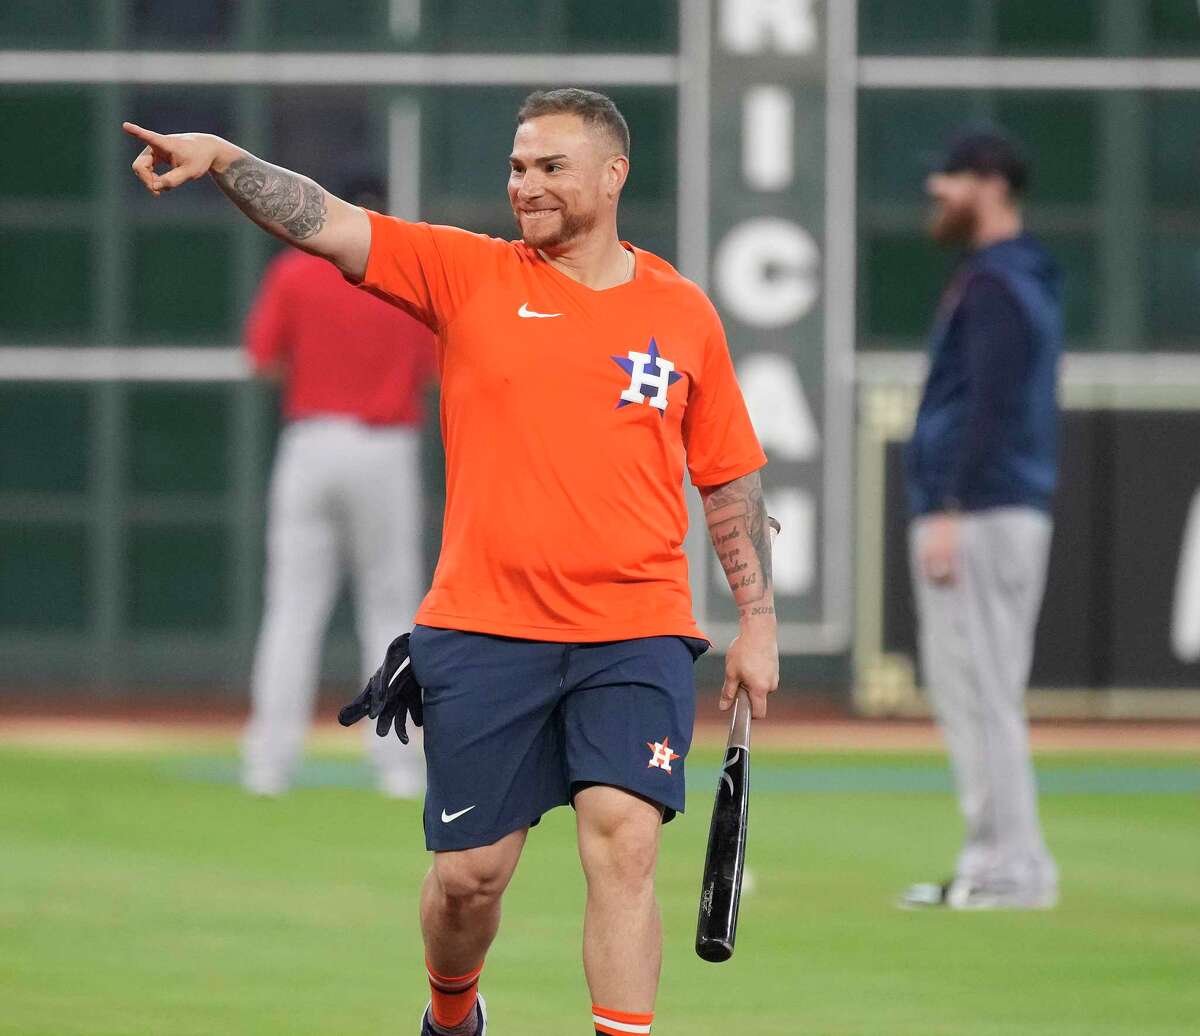 Christian Vázquez visits his former teammates from the Boston Red Sox during batting practice before the start of an MLB baseball game at Minute Maid Park on Tuesday, Aug. 2, 2022 in Houston.